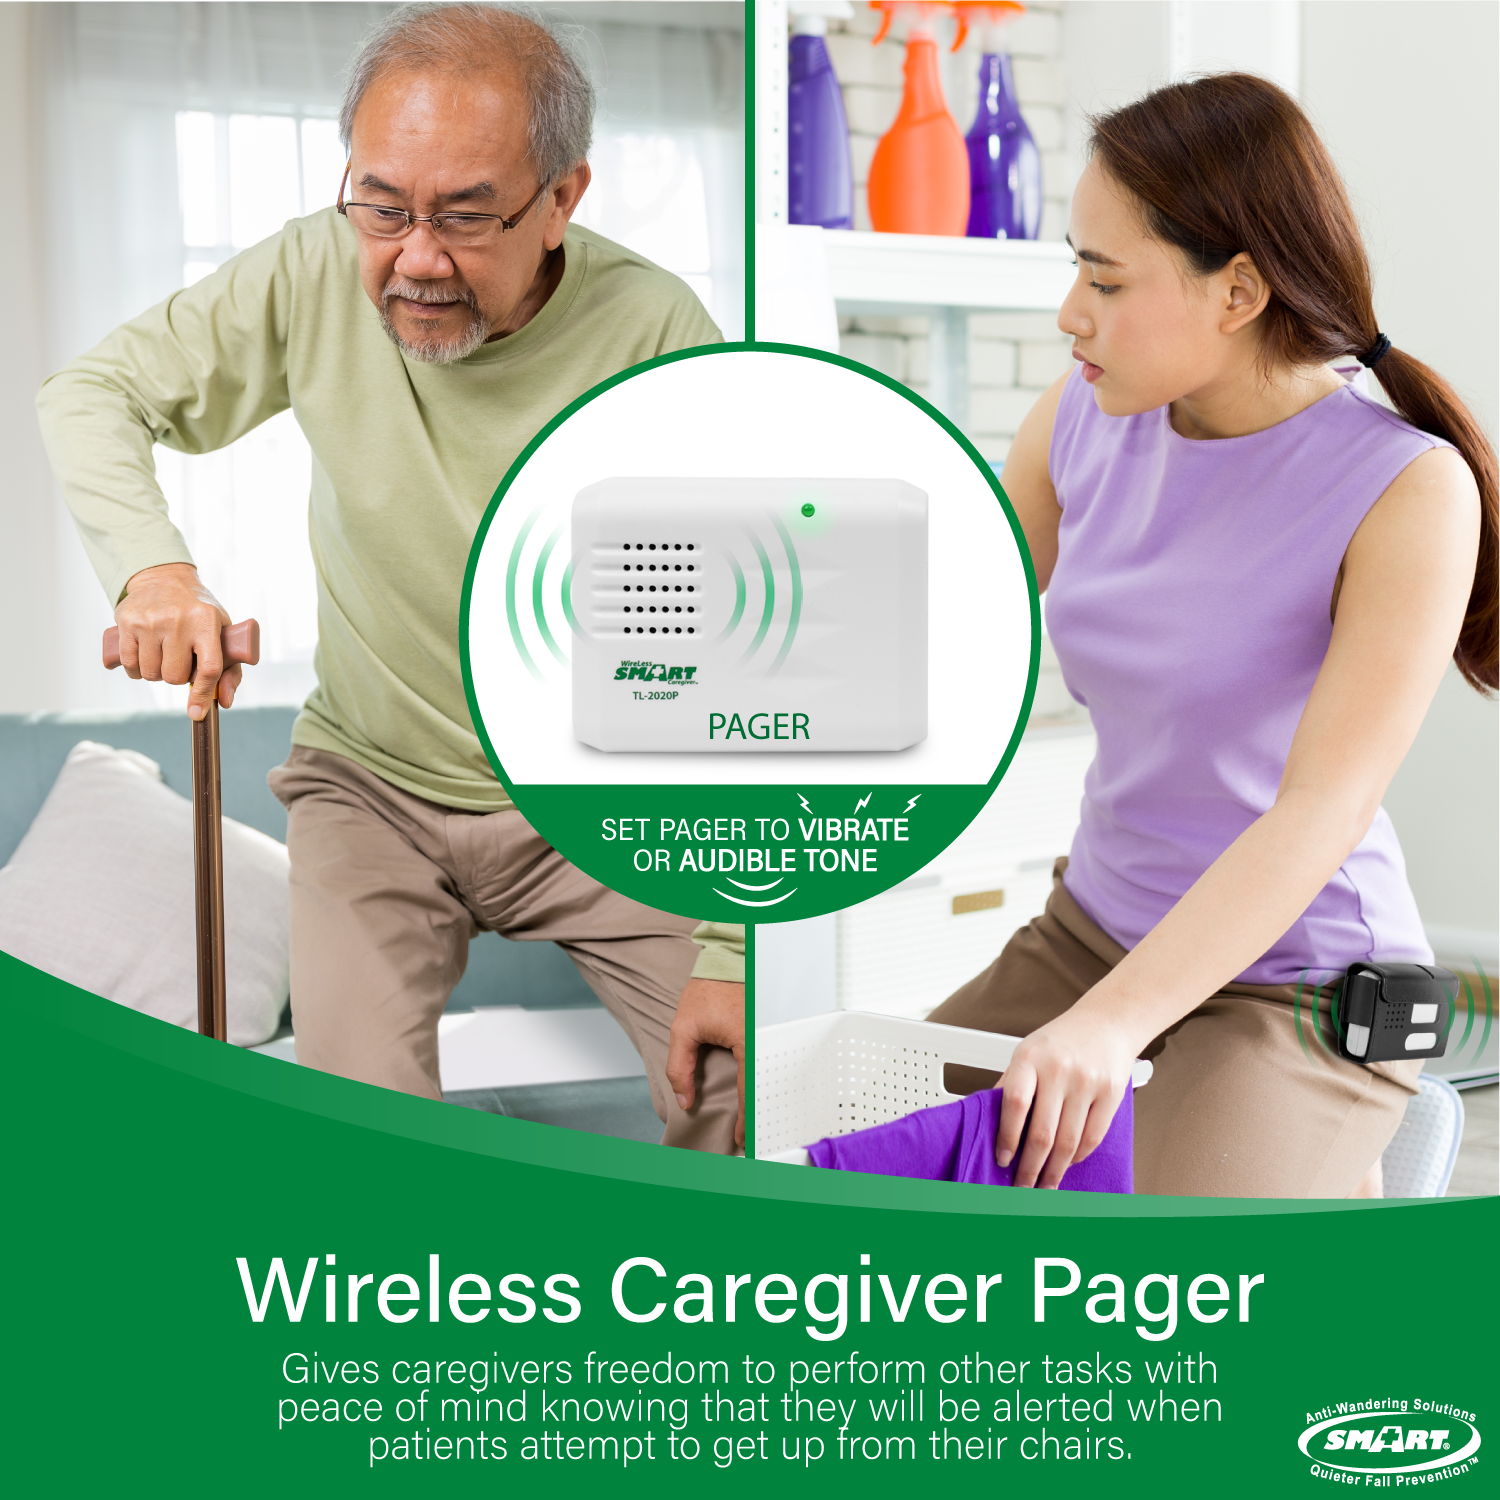 Wireless Chair Pad & Pager System